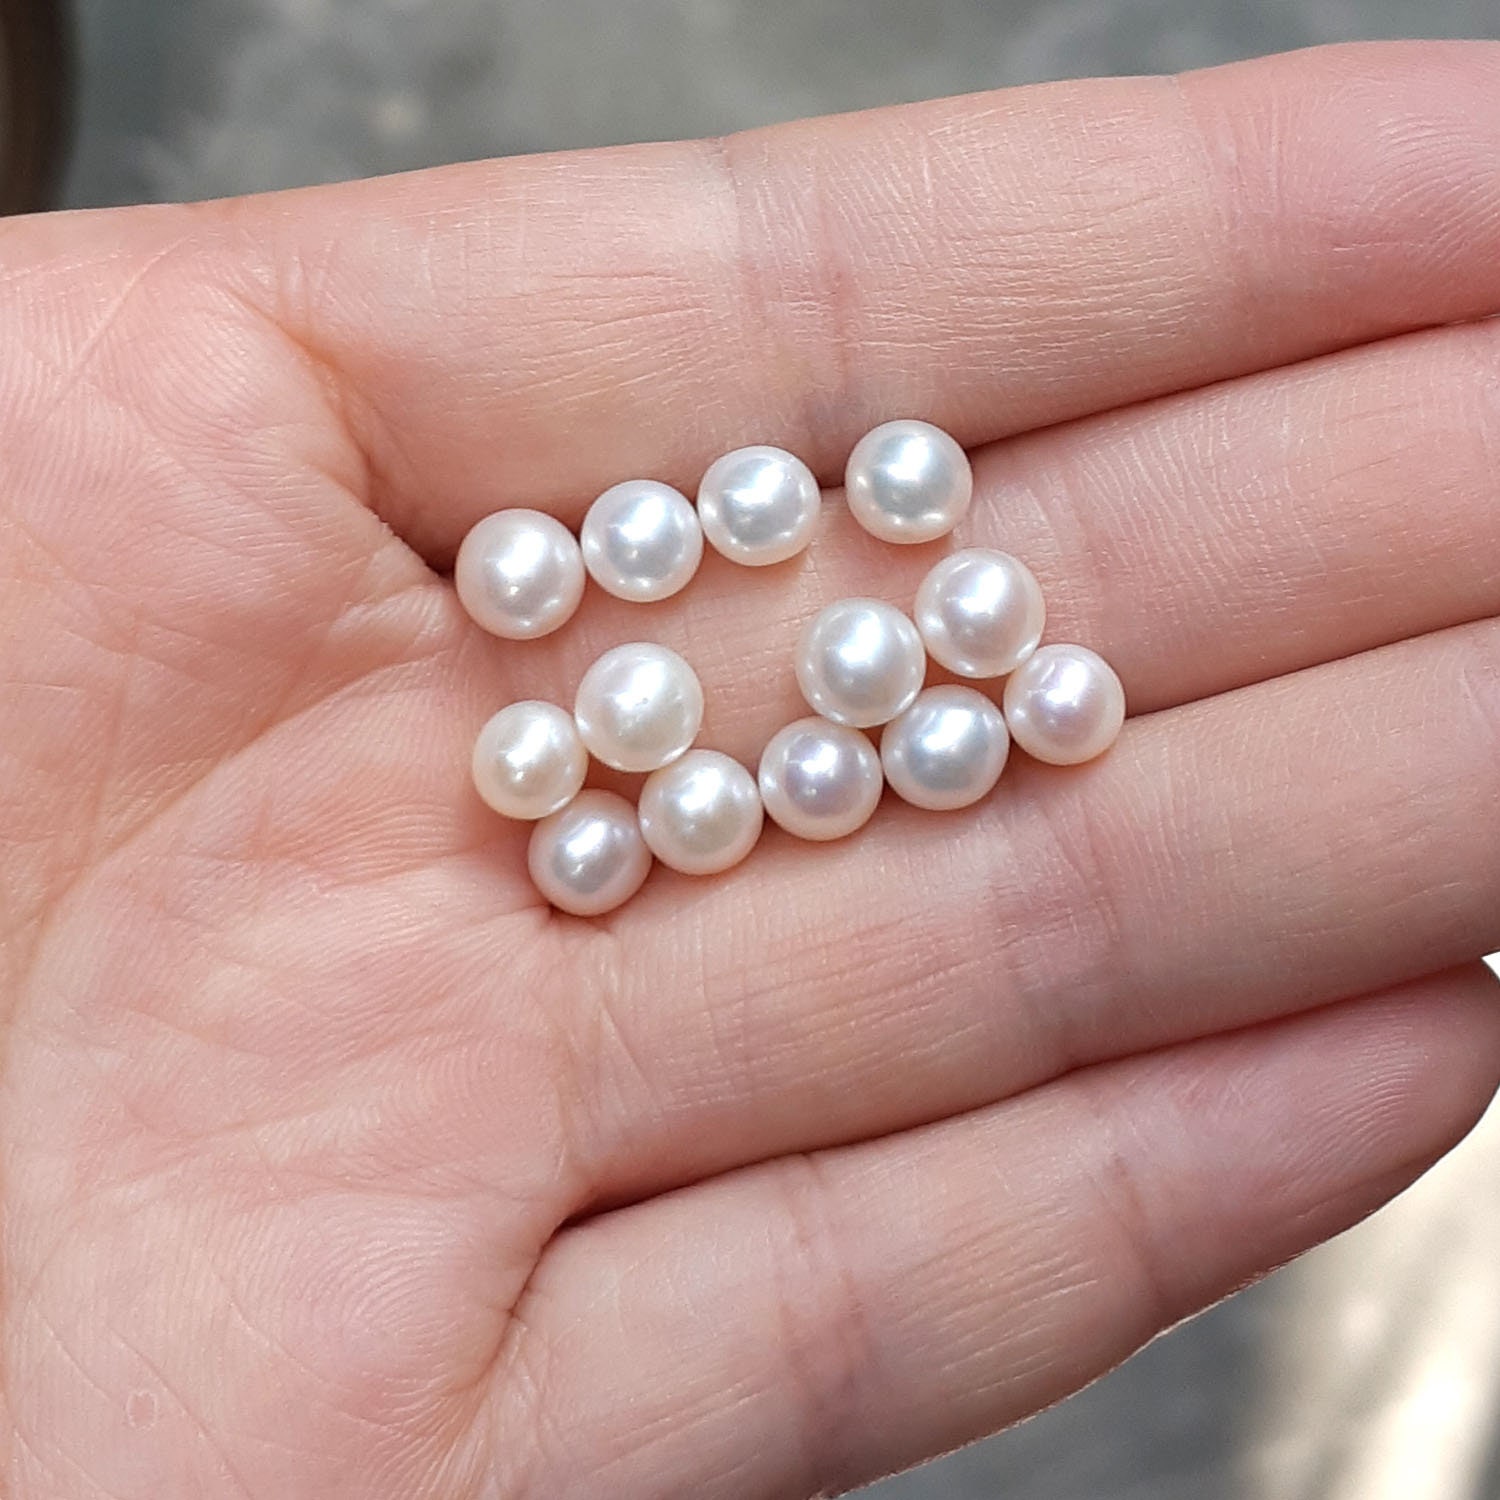 Pearls Assorted, 36 Grams, White 